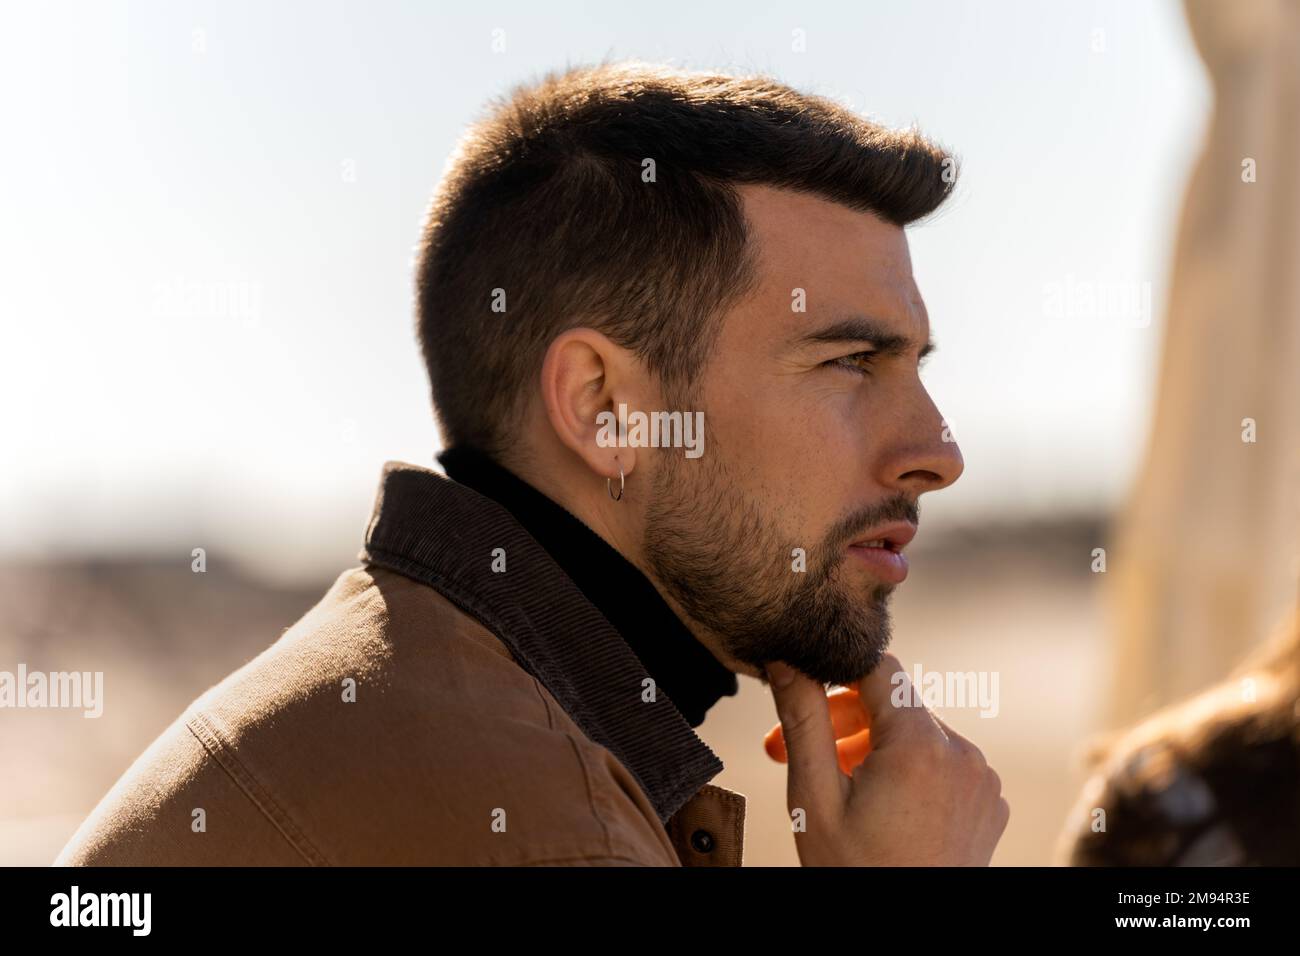 Side view of pensive bearded guy in outerwear with earring looking away thoughtfully while touching chin on blurred background Stock Photo